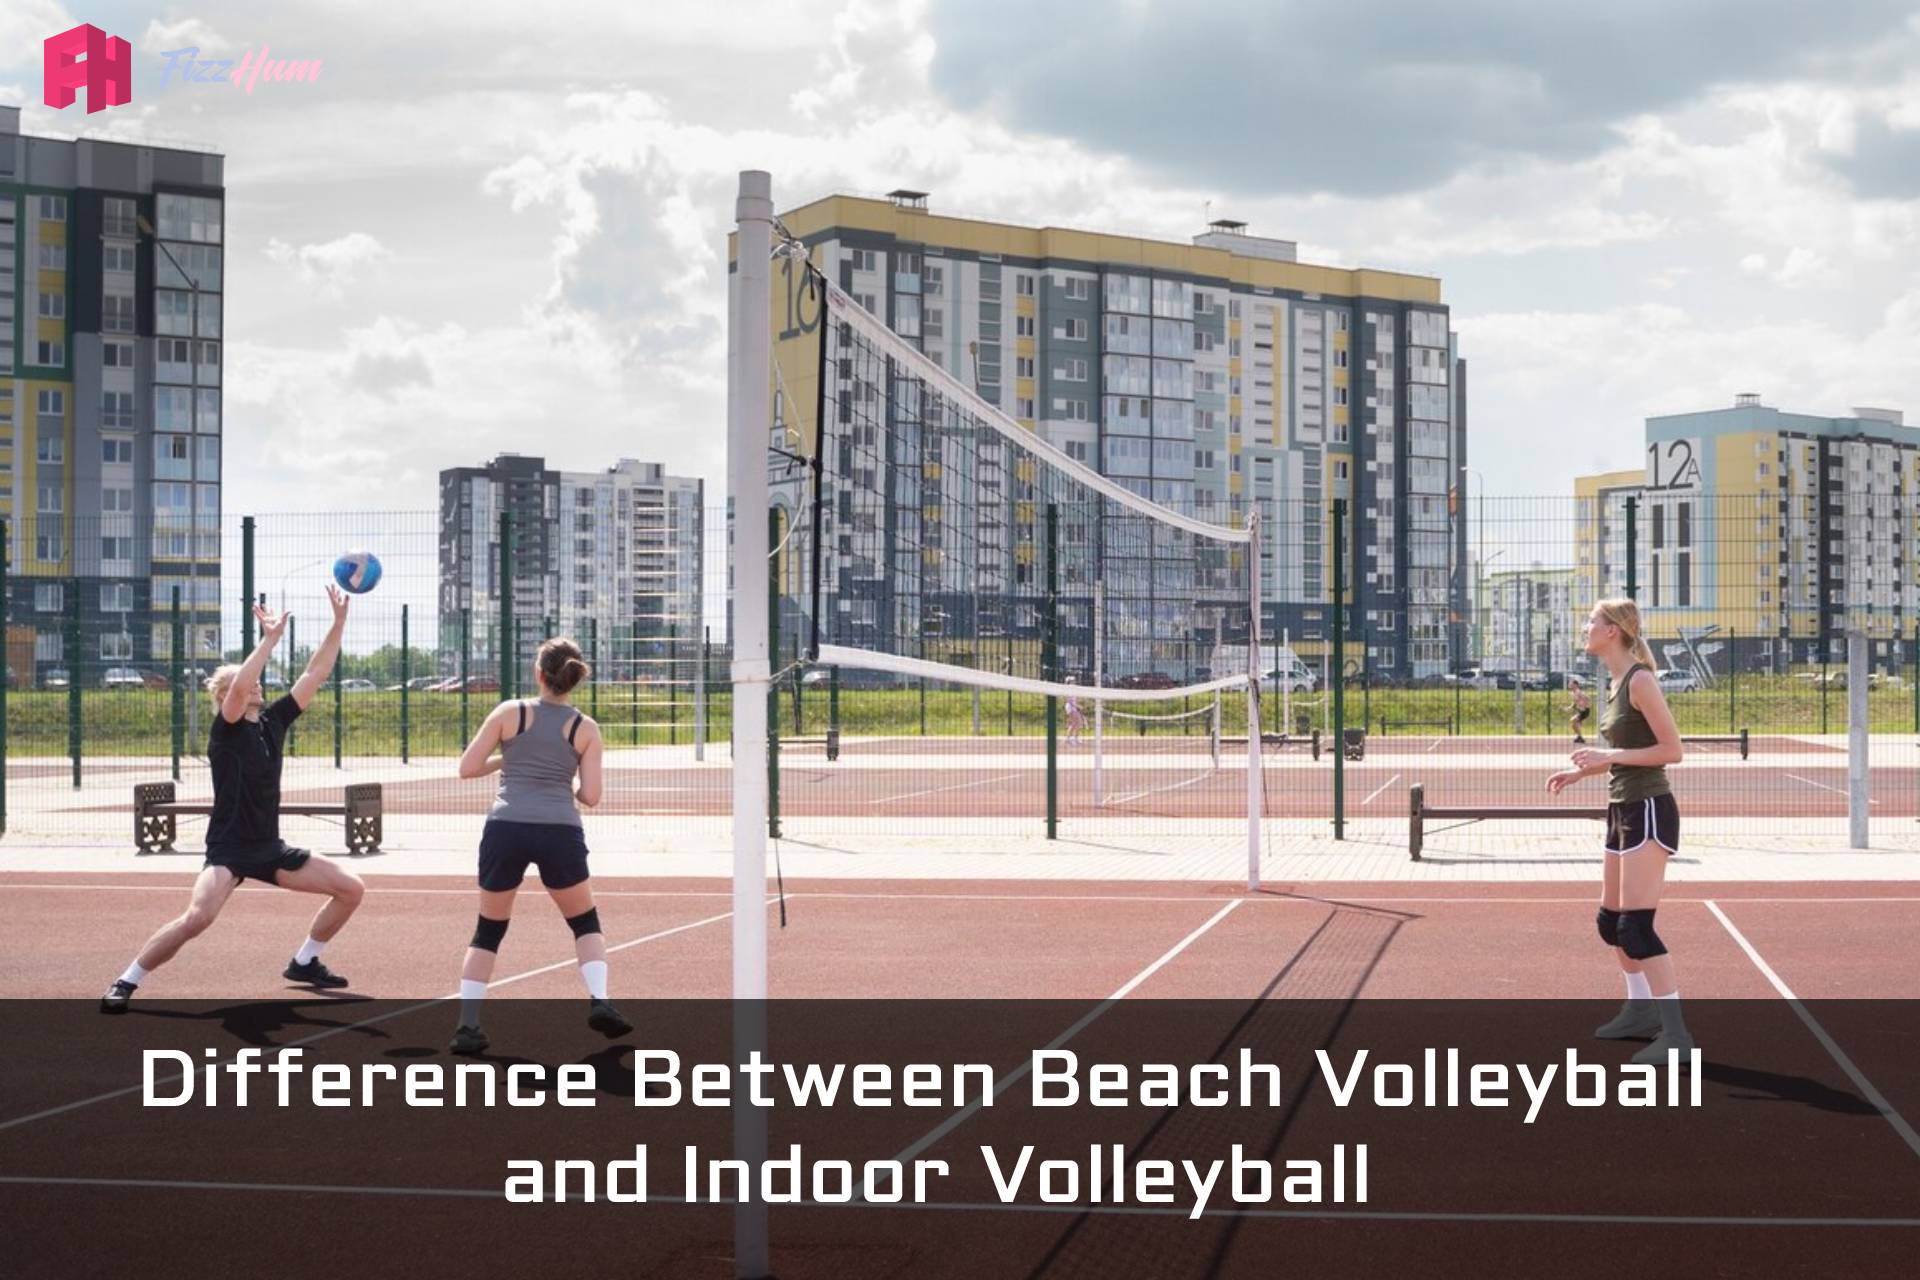 The Difference between Indoor Volley Ball and Beach Volley Ball